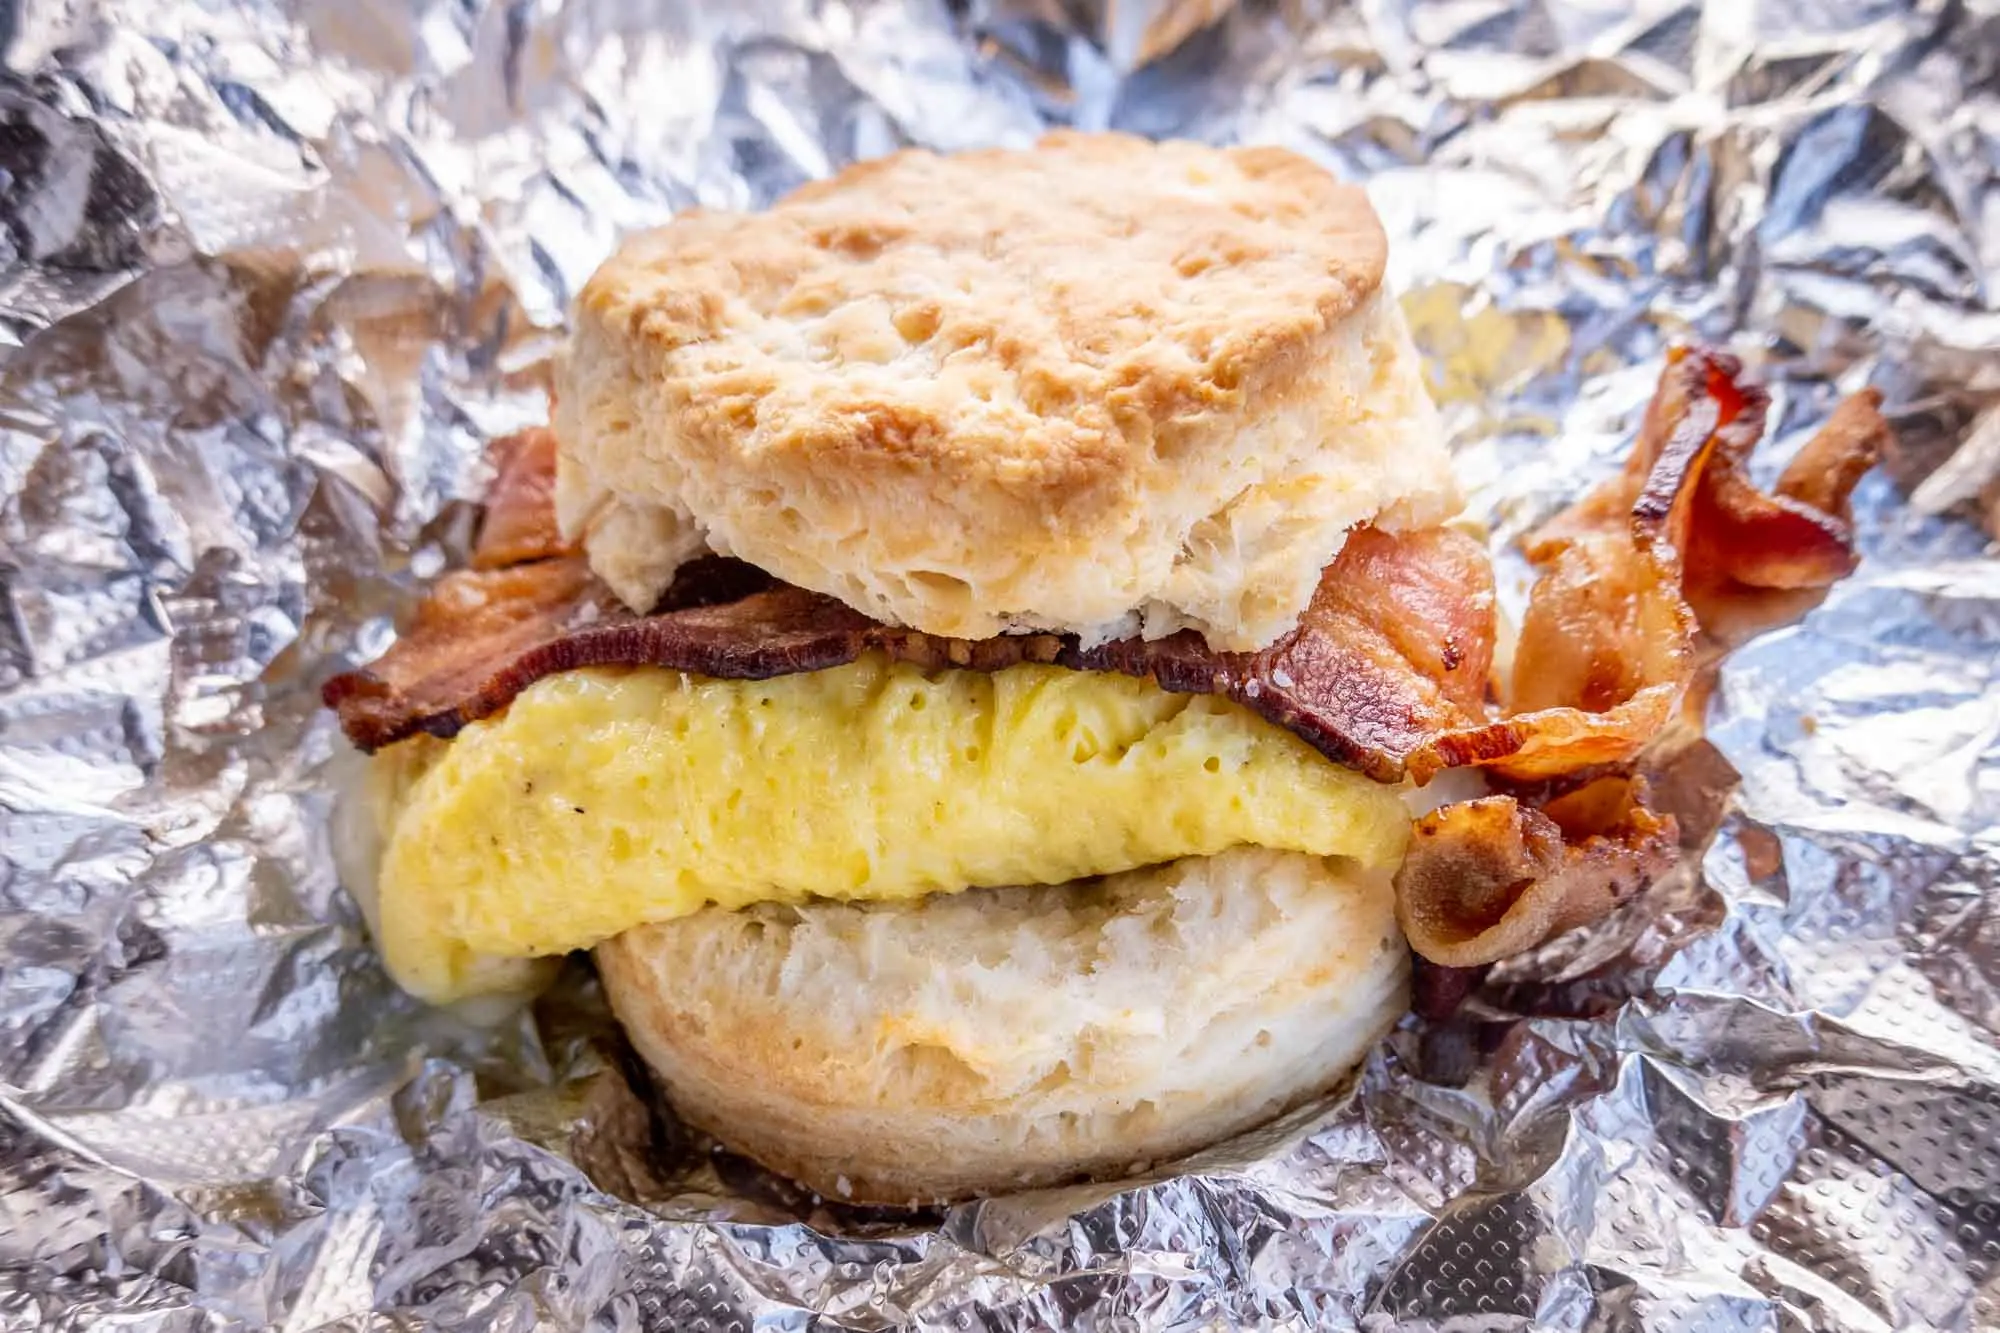 Bacon and egg on a buttermilk biscuit sandwich